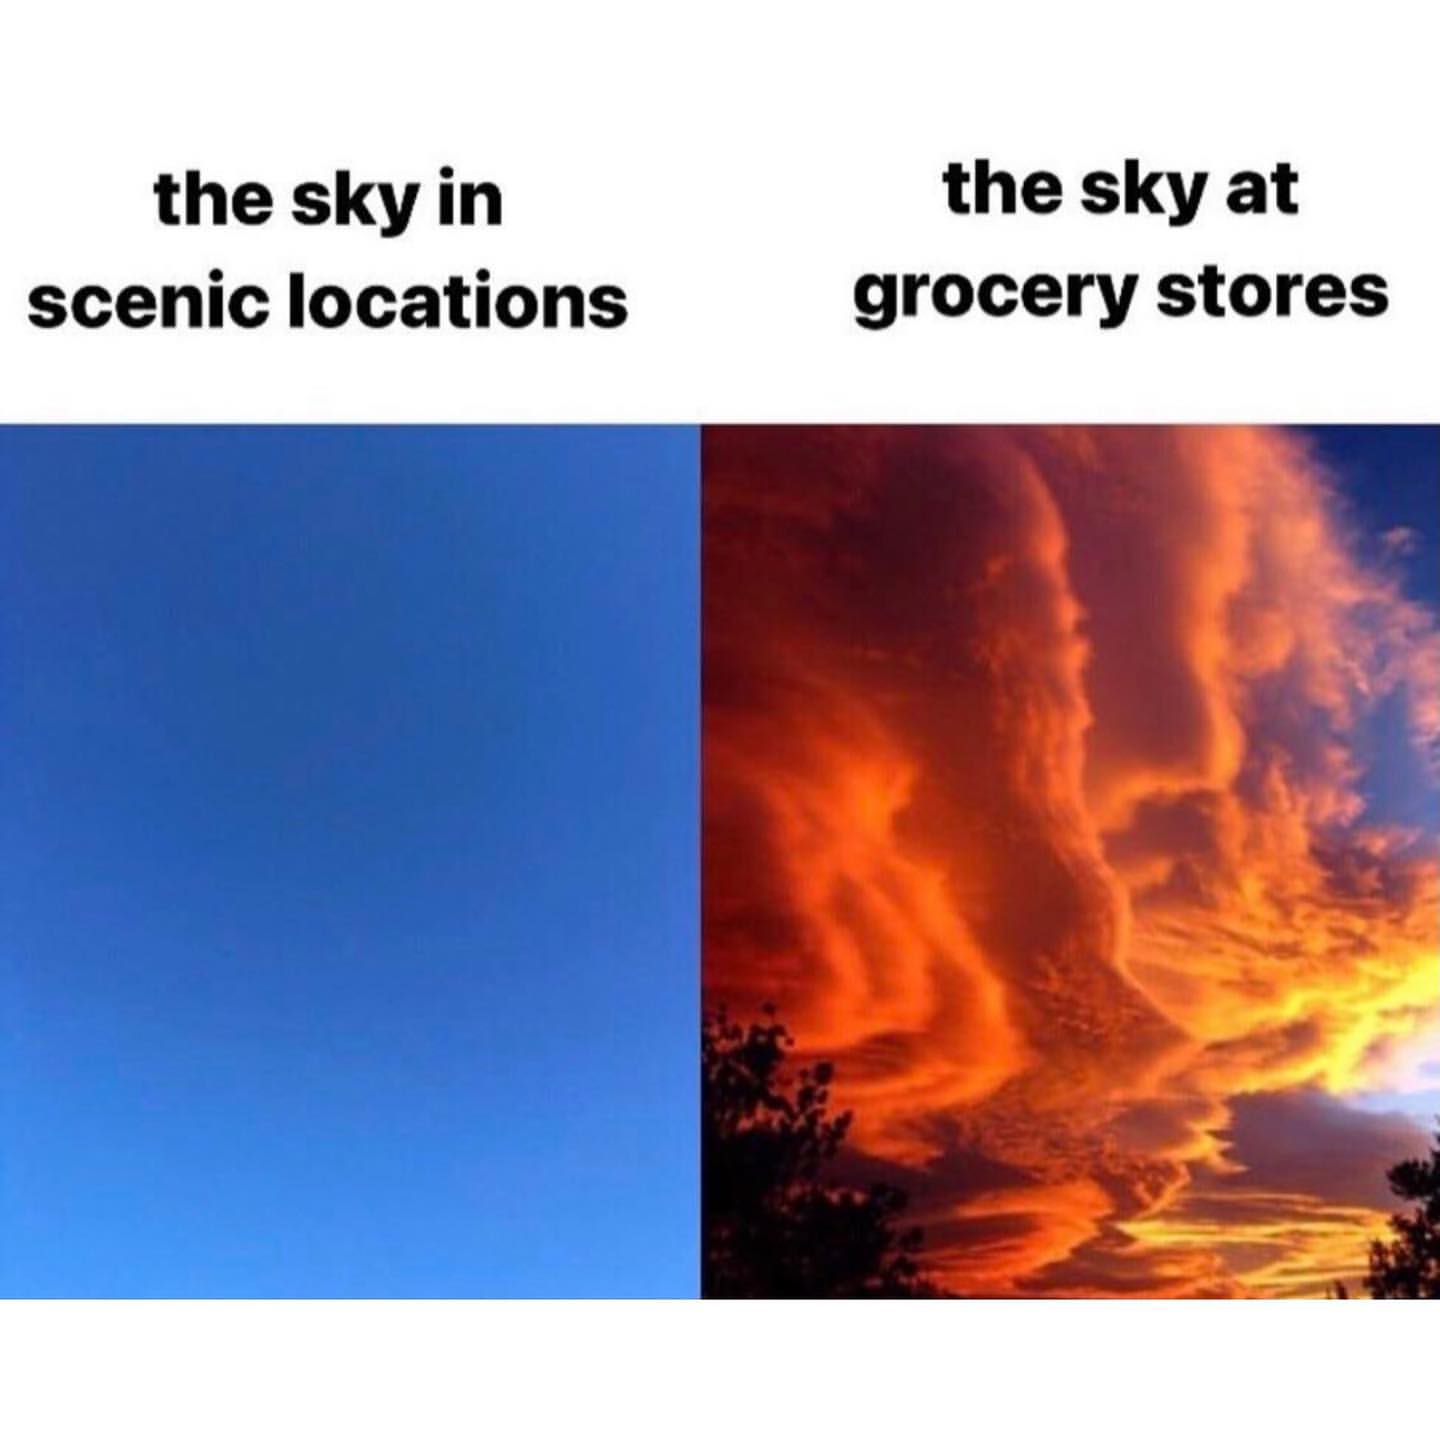 The sky in scenic locations. The sky at grocery stores.